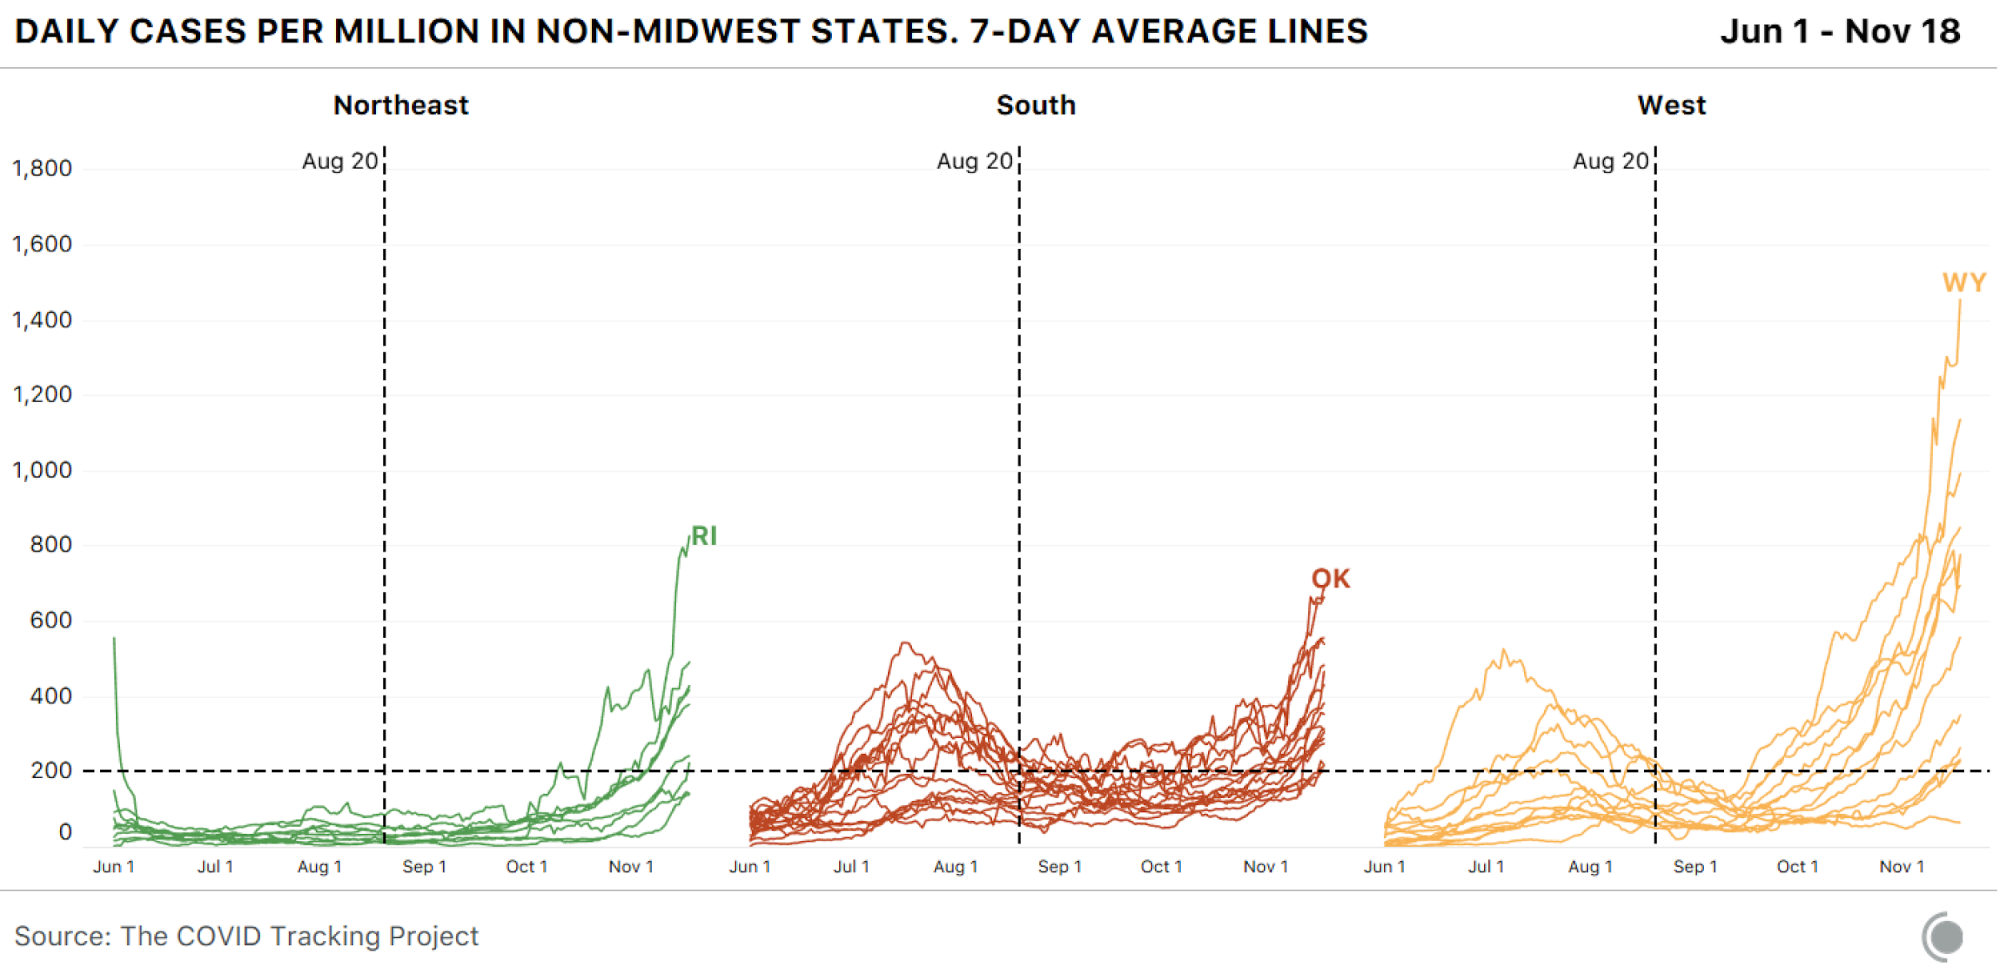 Line charts showing cases per million people (7-day average) by state for the West, Northeast, and South. Almost every state is rising quickly.